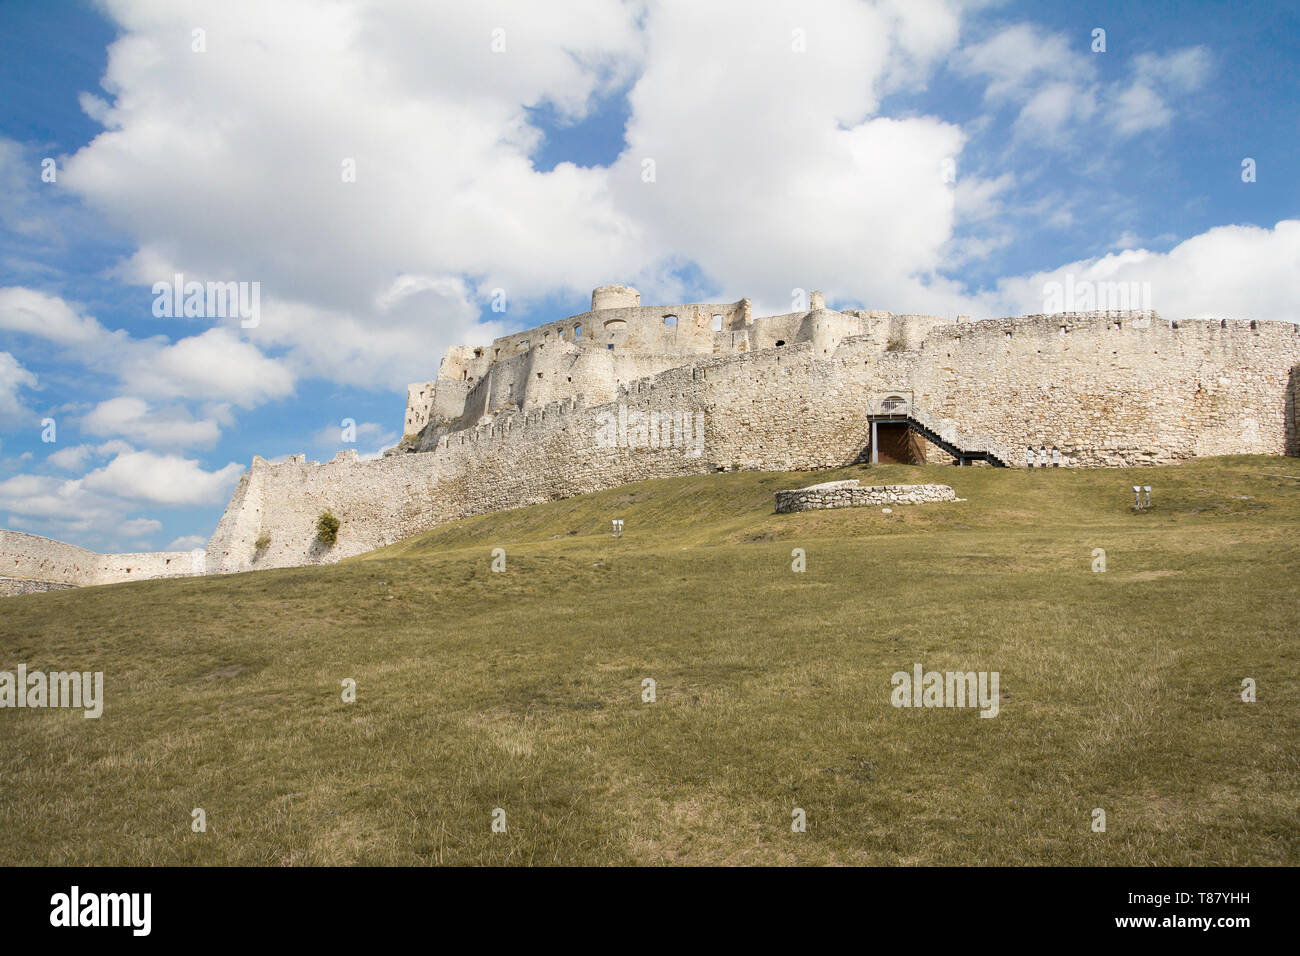 ruins of medieval castle Stock Photo